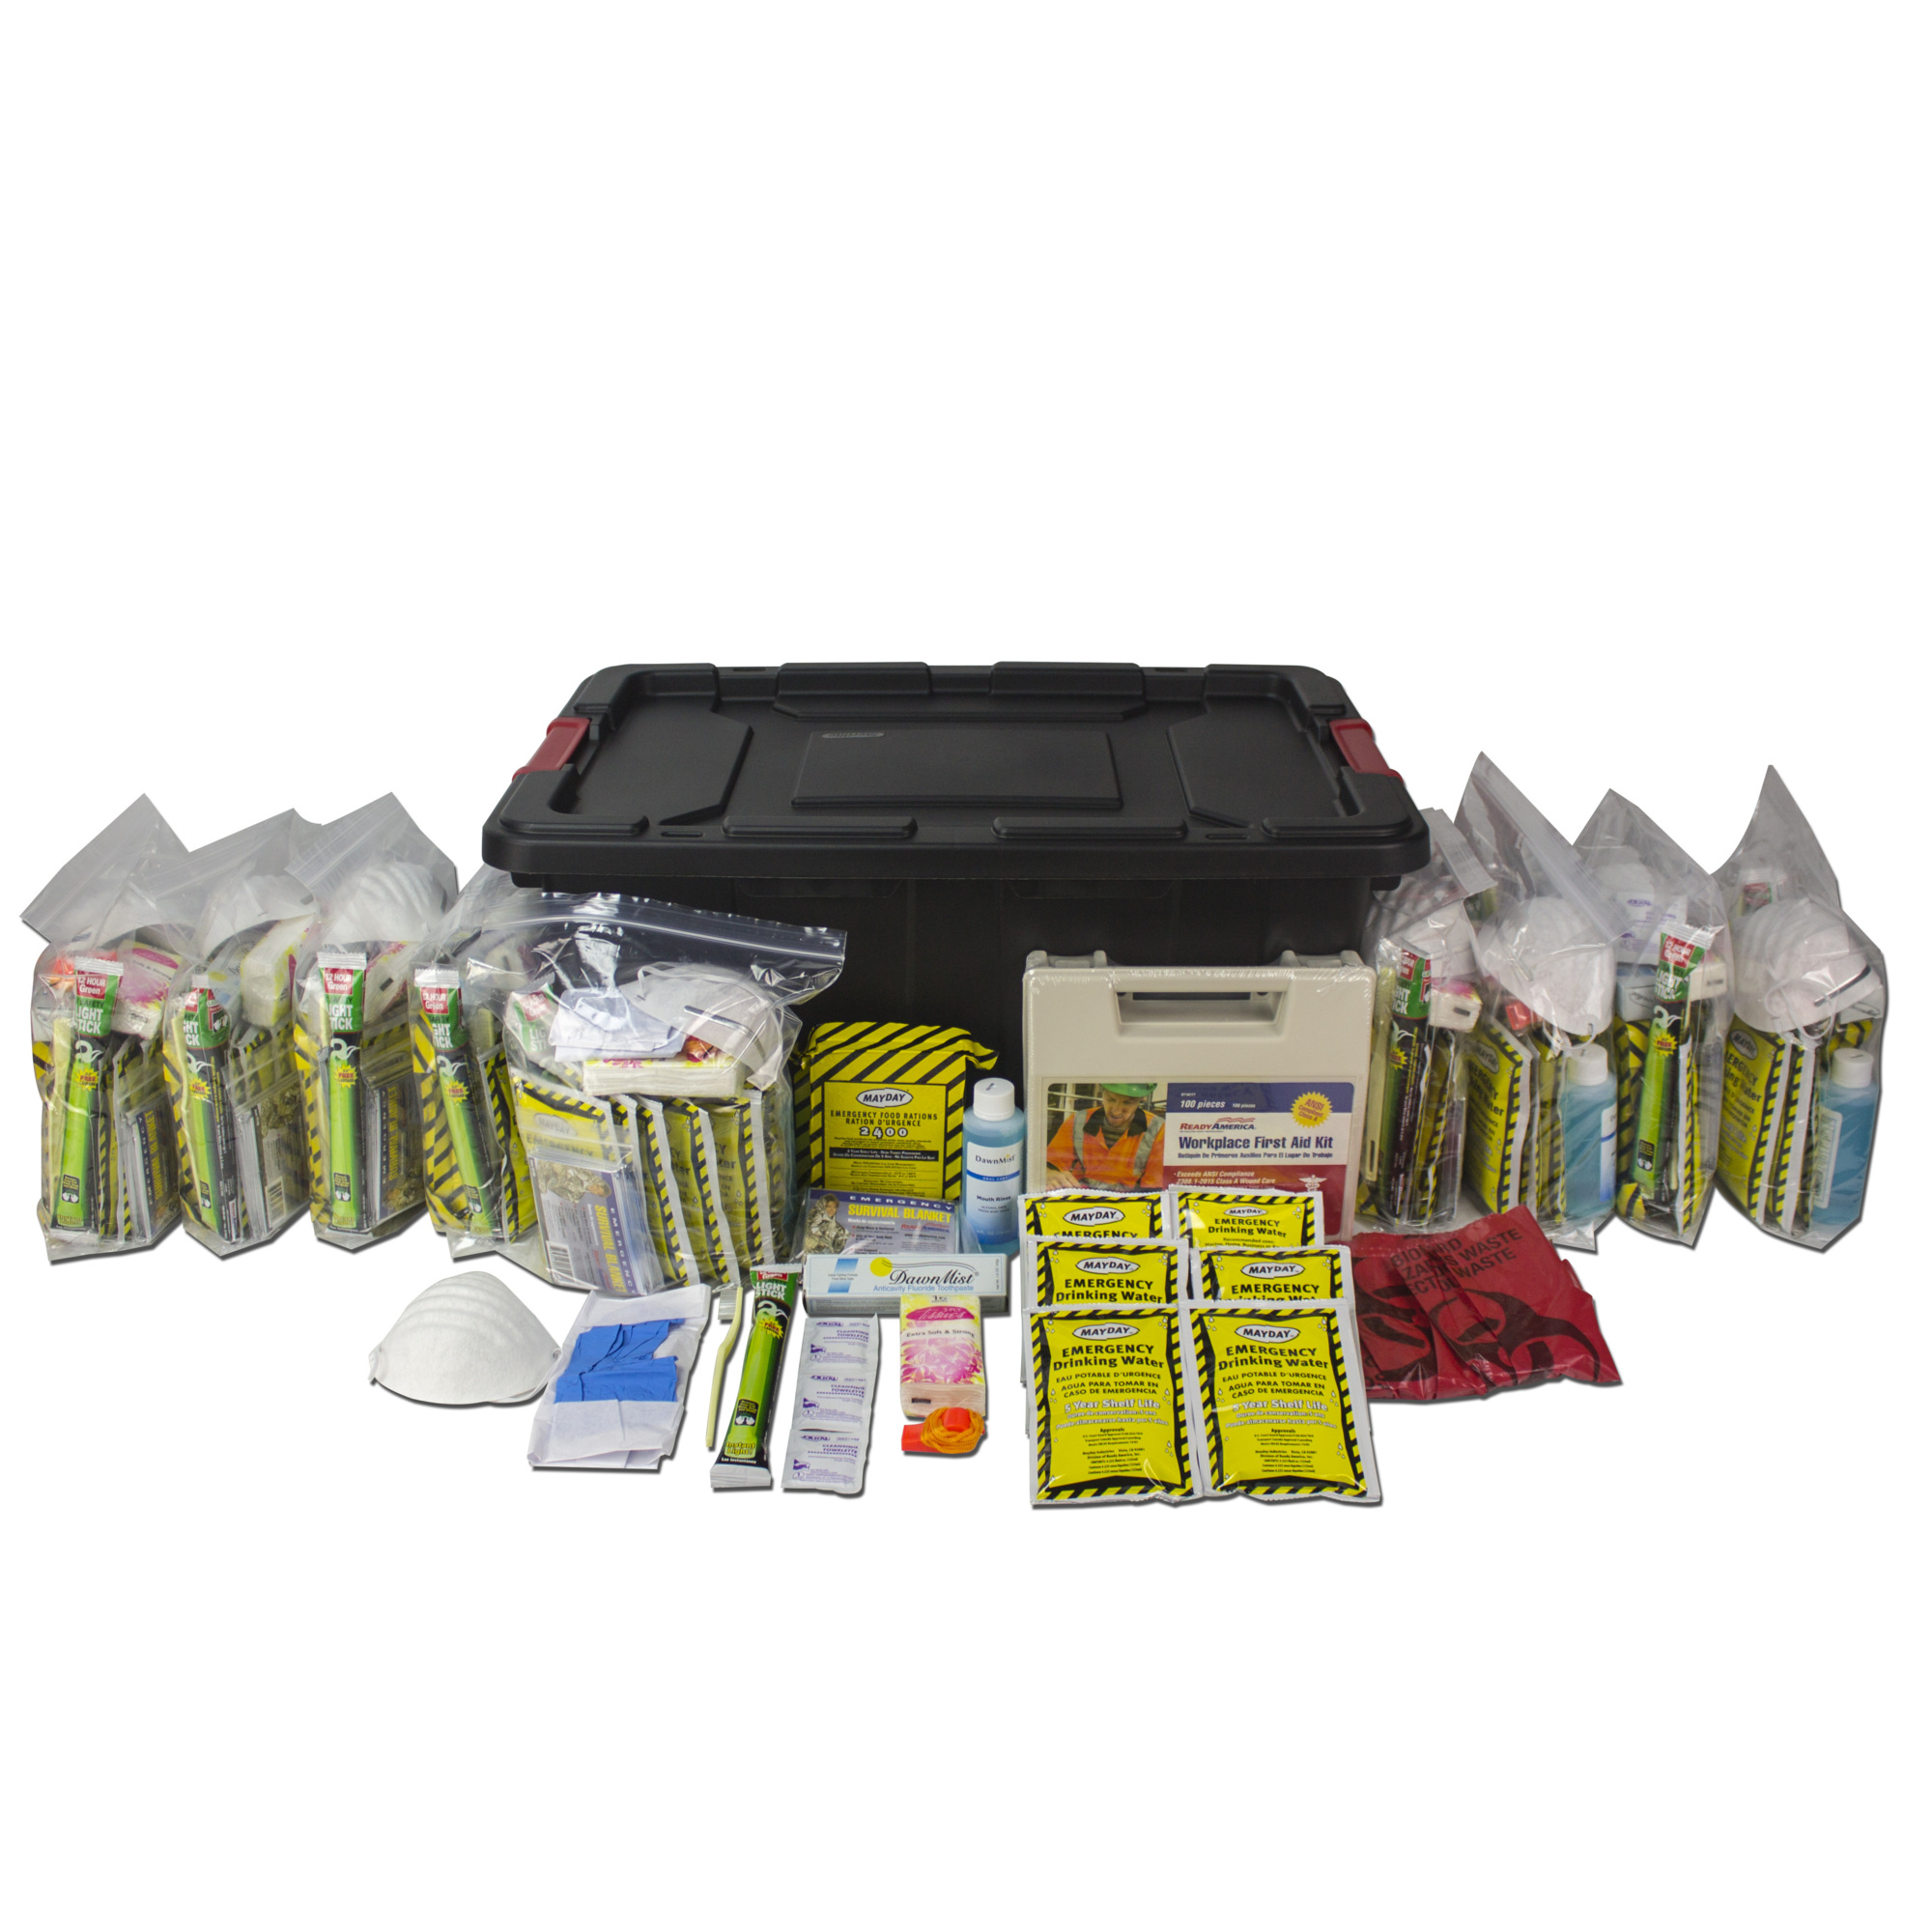 Ready America, 10-Person, 3 Day, Survival Kit, Pieces (qty.) 207, Model 70551